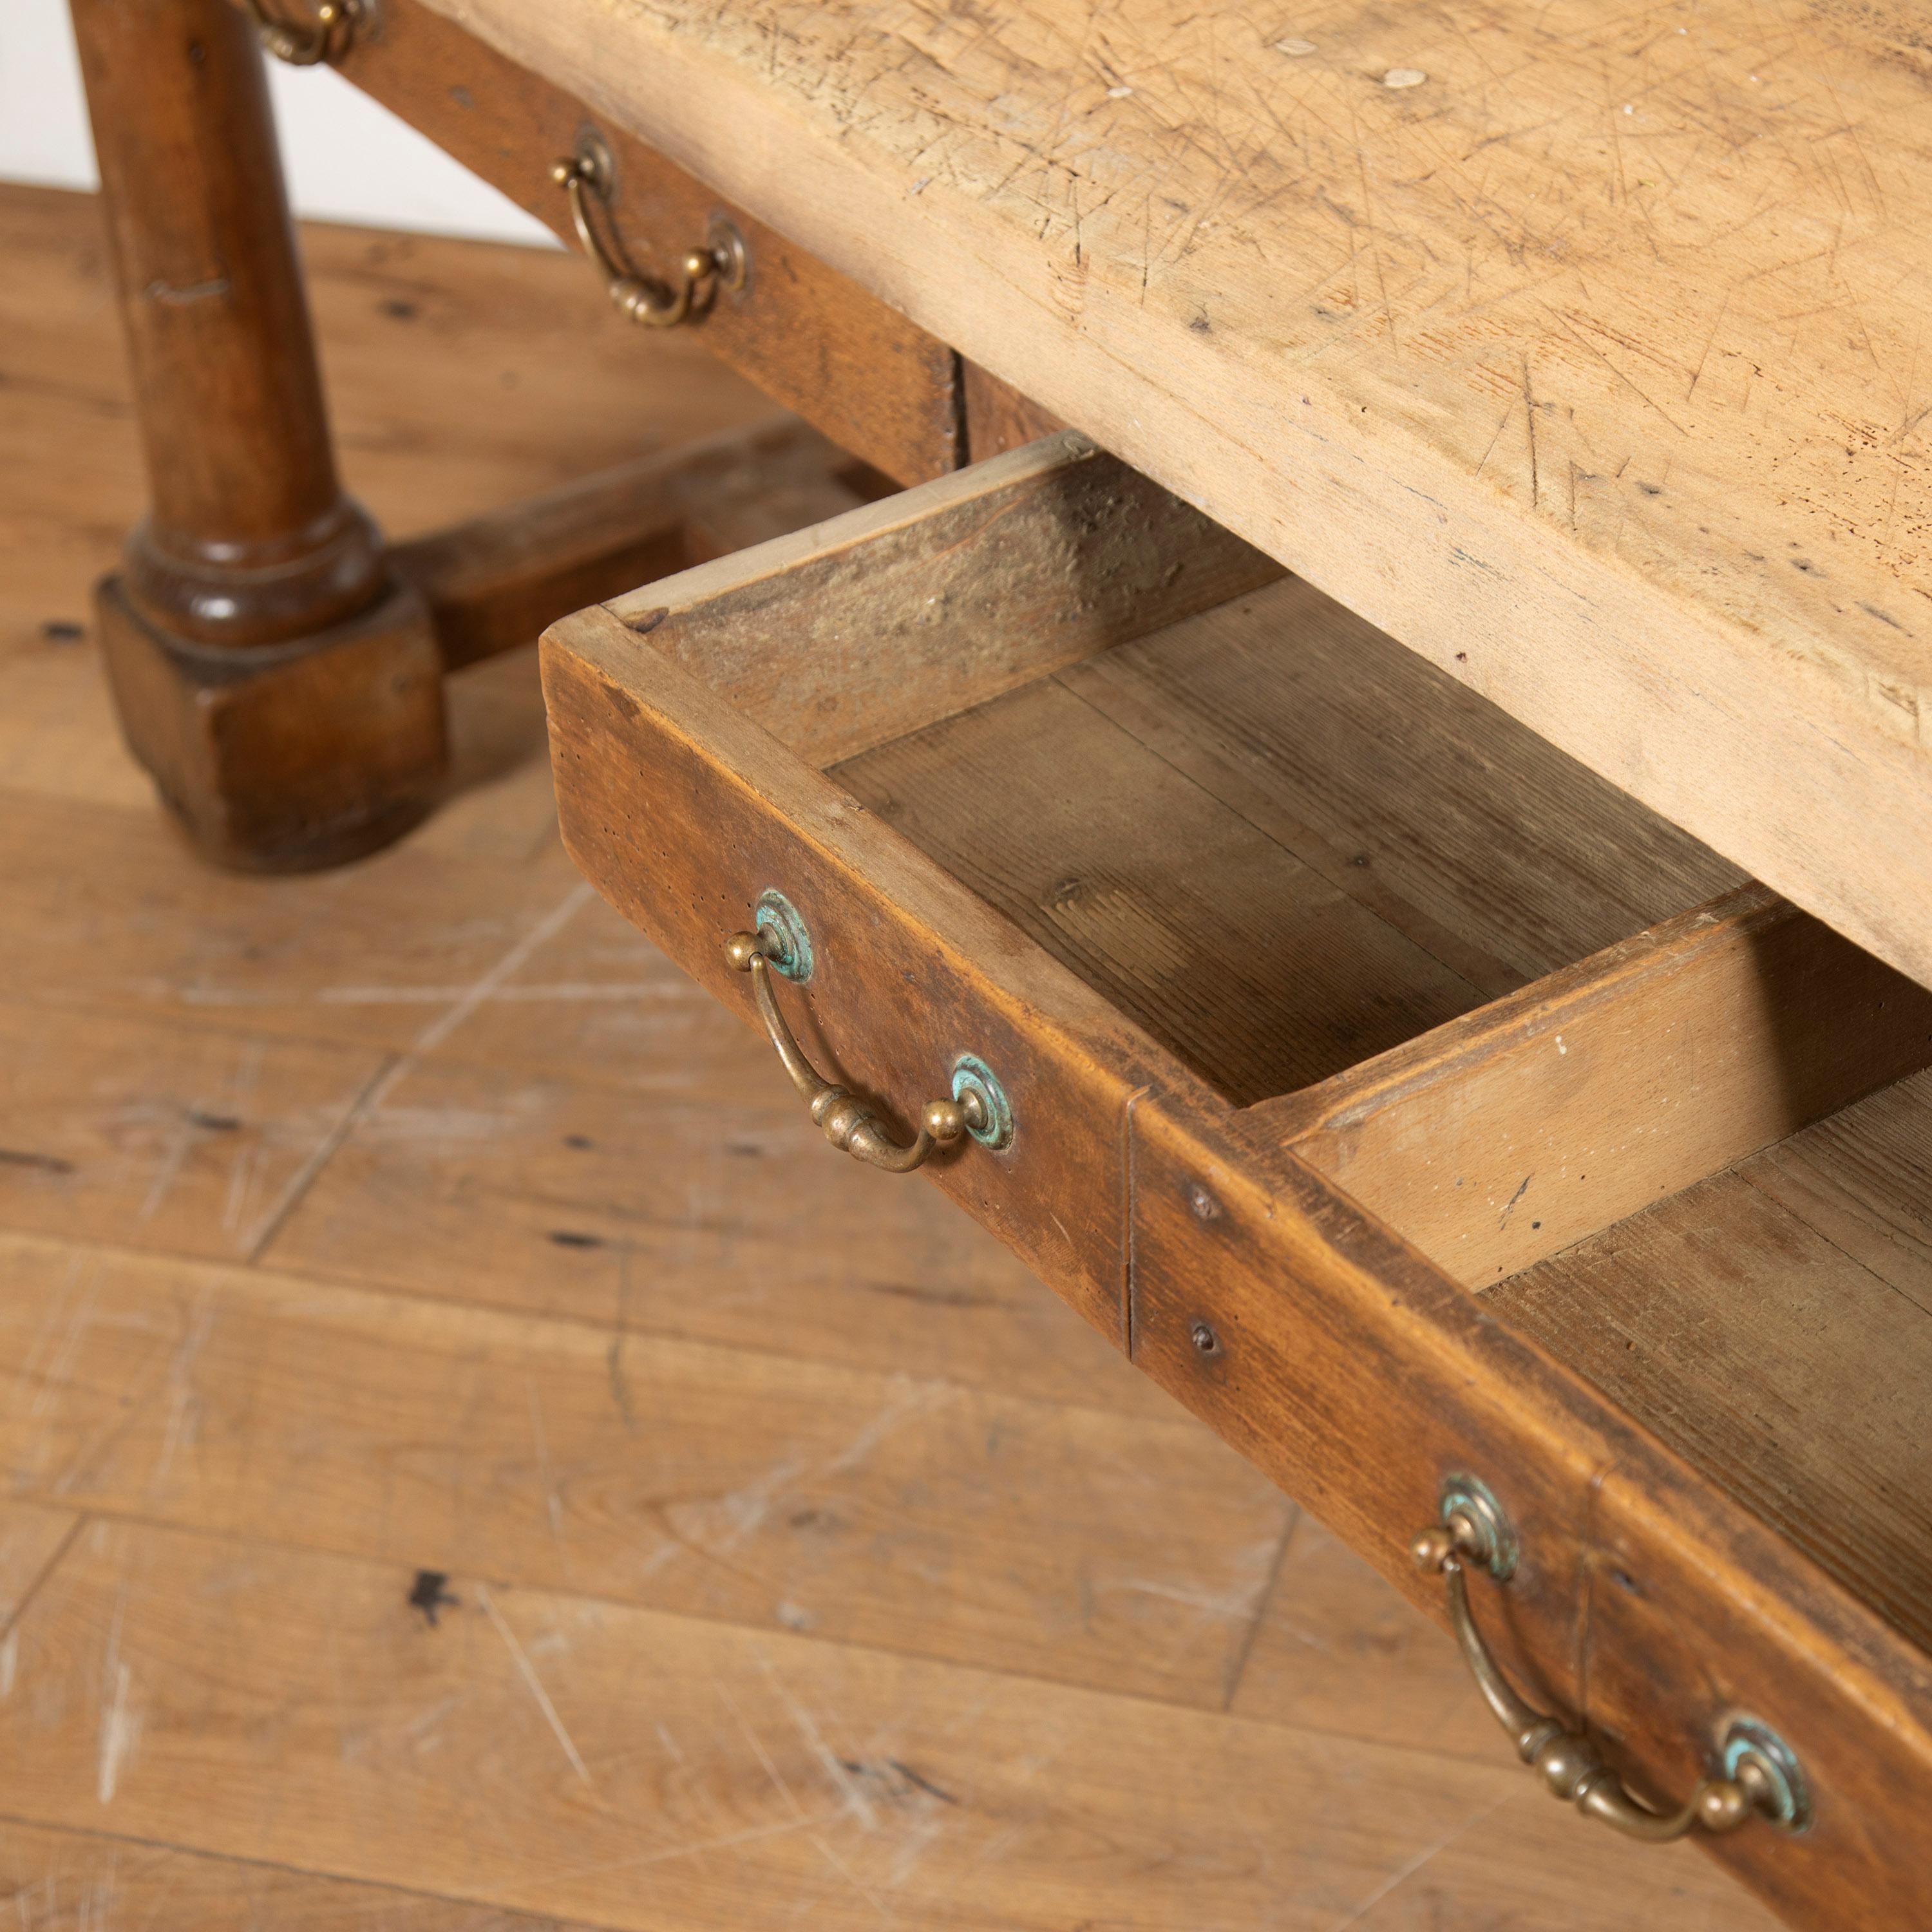 Fantastic French early 19th century butcher's table.

This table features a lovely walnut base and drawers that would make for useful storage within a kitchen or being used as a central island. 

It has attractive signs of wear to both the base